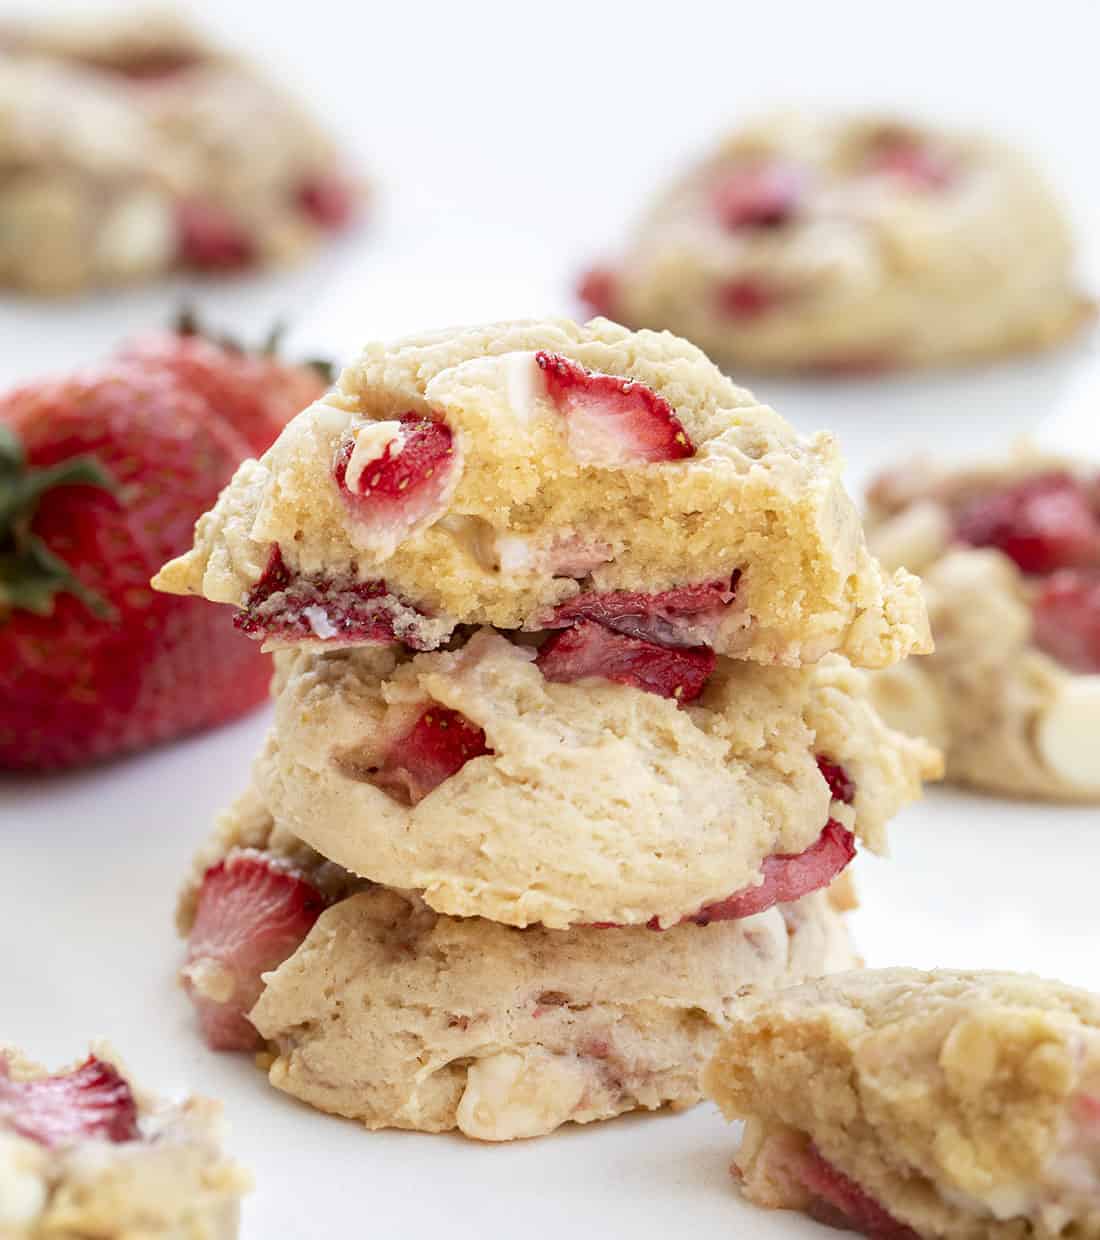 Stacked and Broken Into Soft Batch Strawberry Cookies